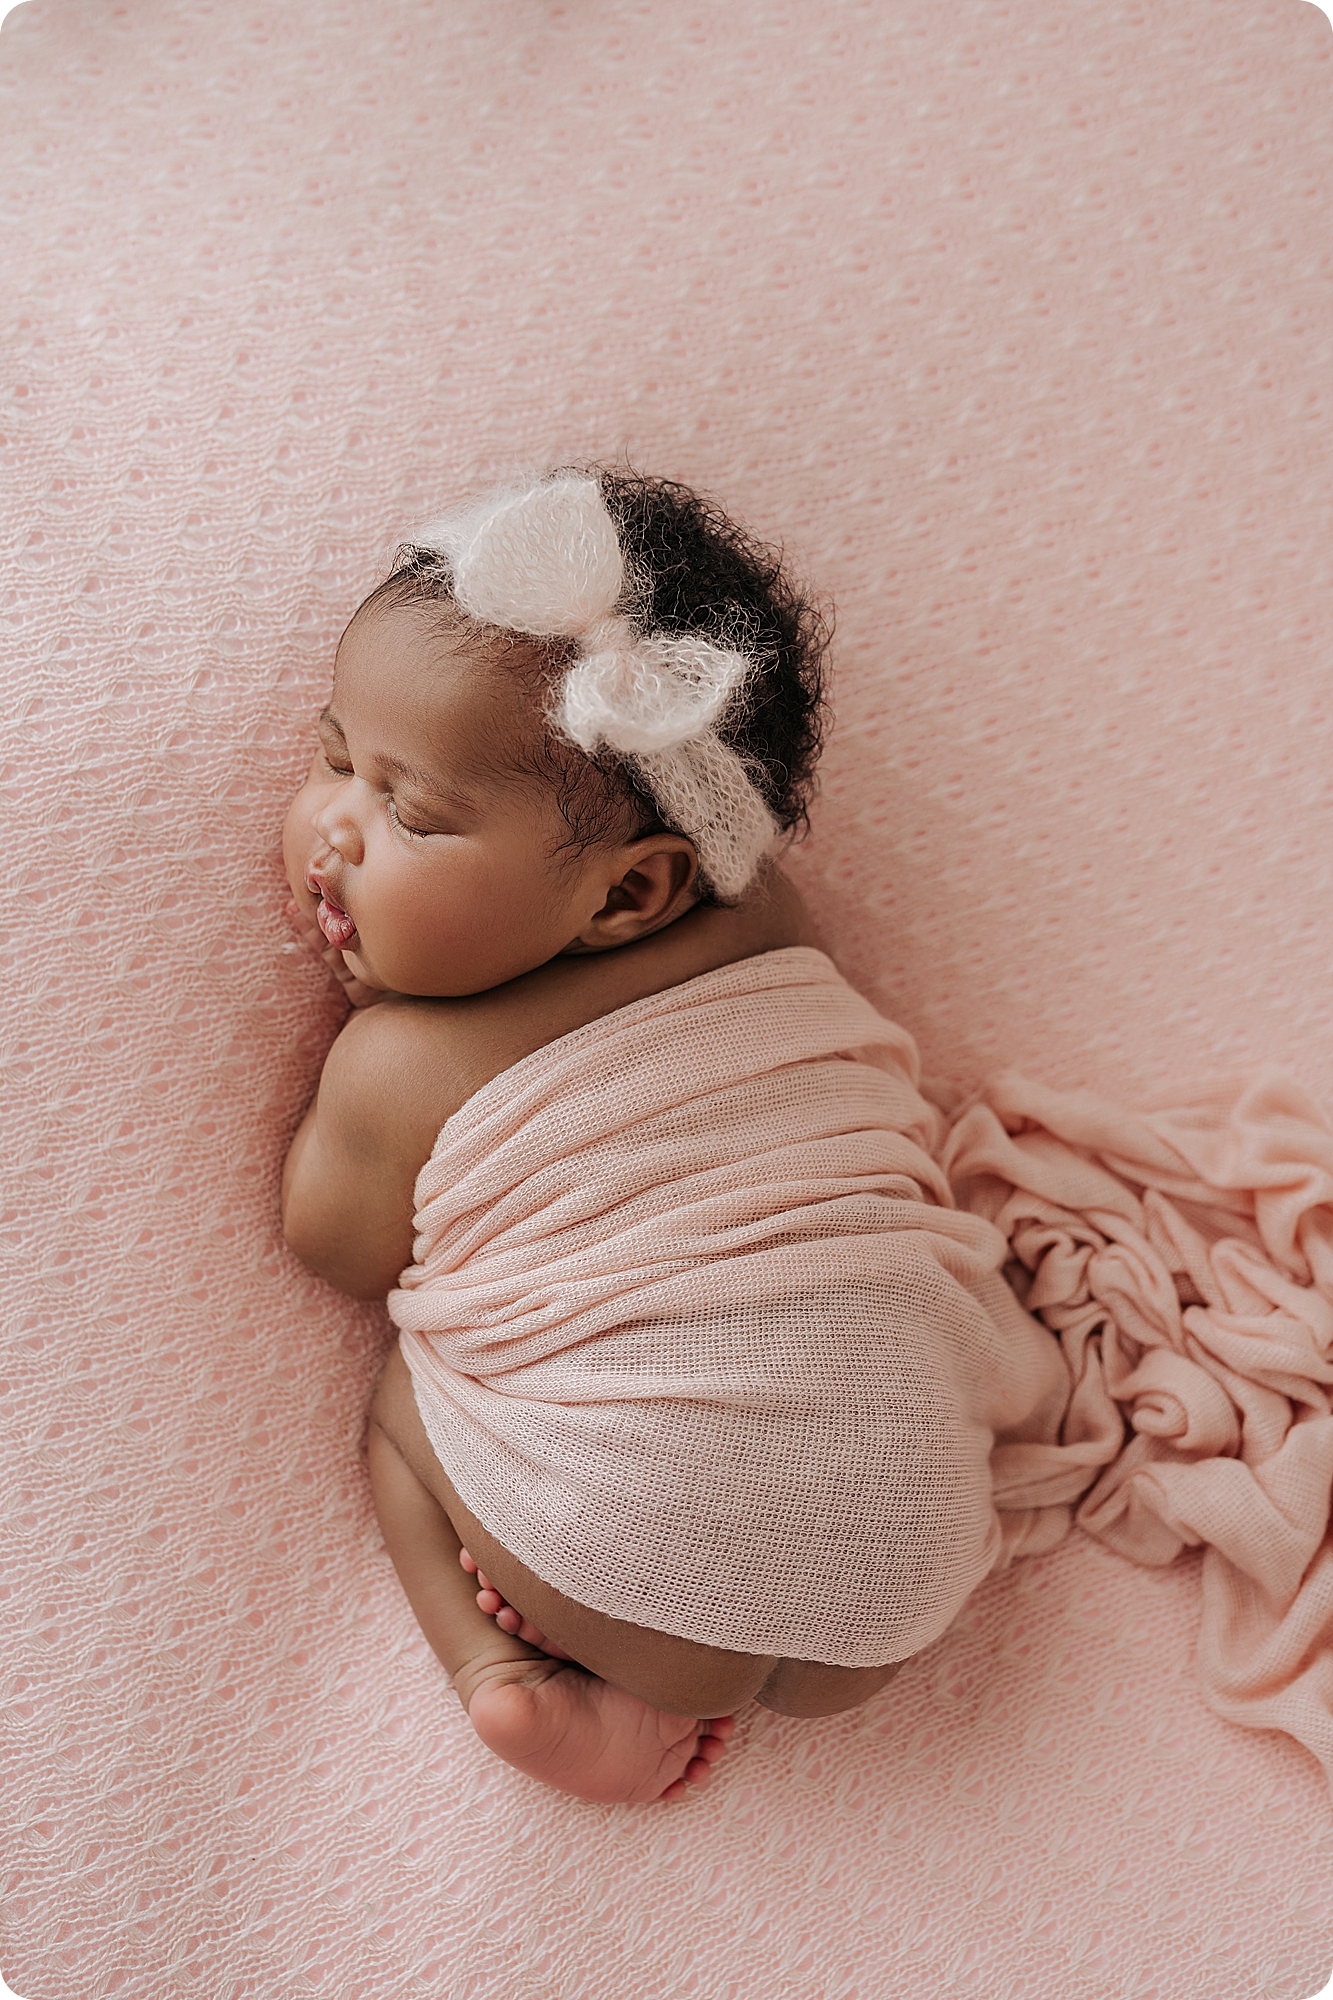 newborn baby girl with bow in hair sleeps on pastel pink blanket